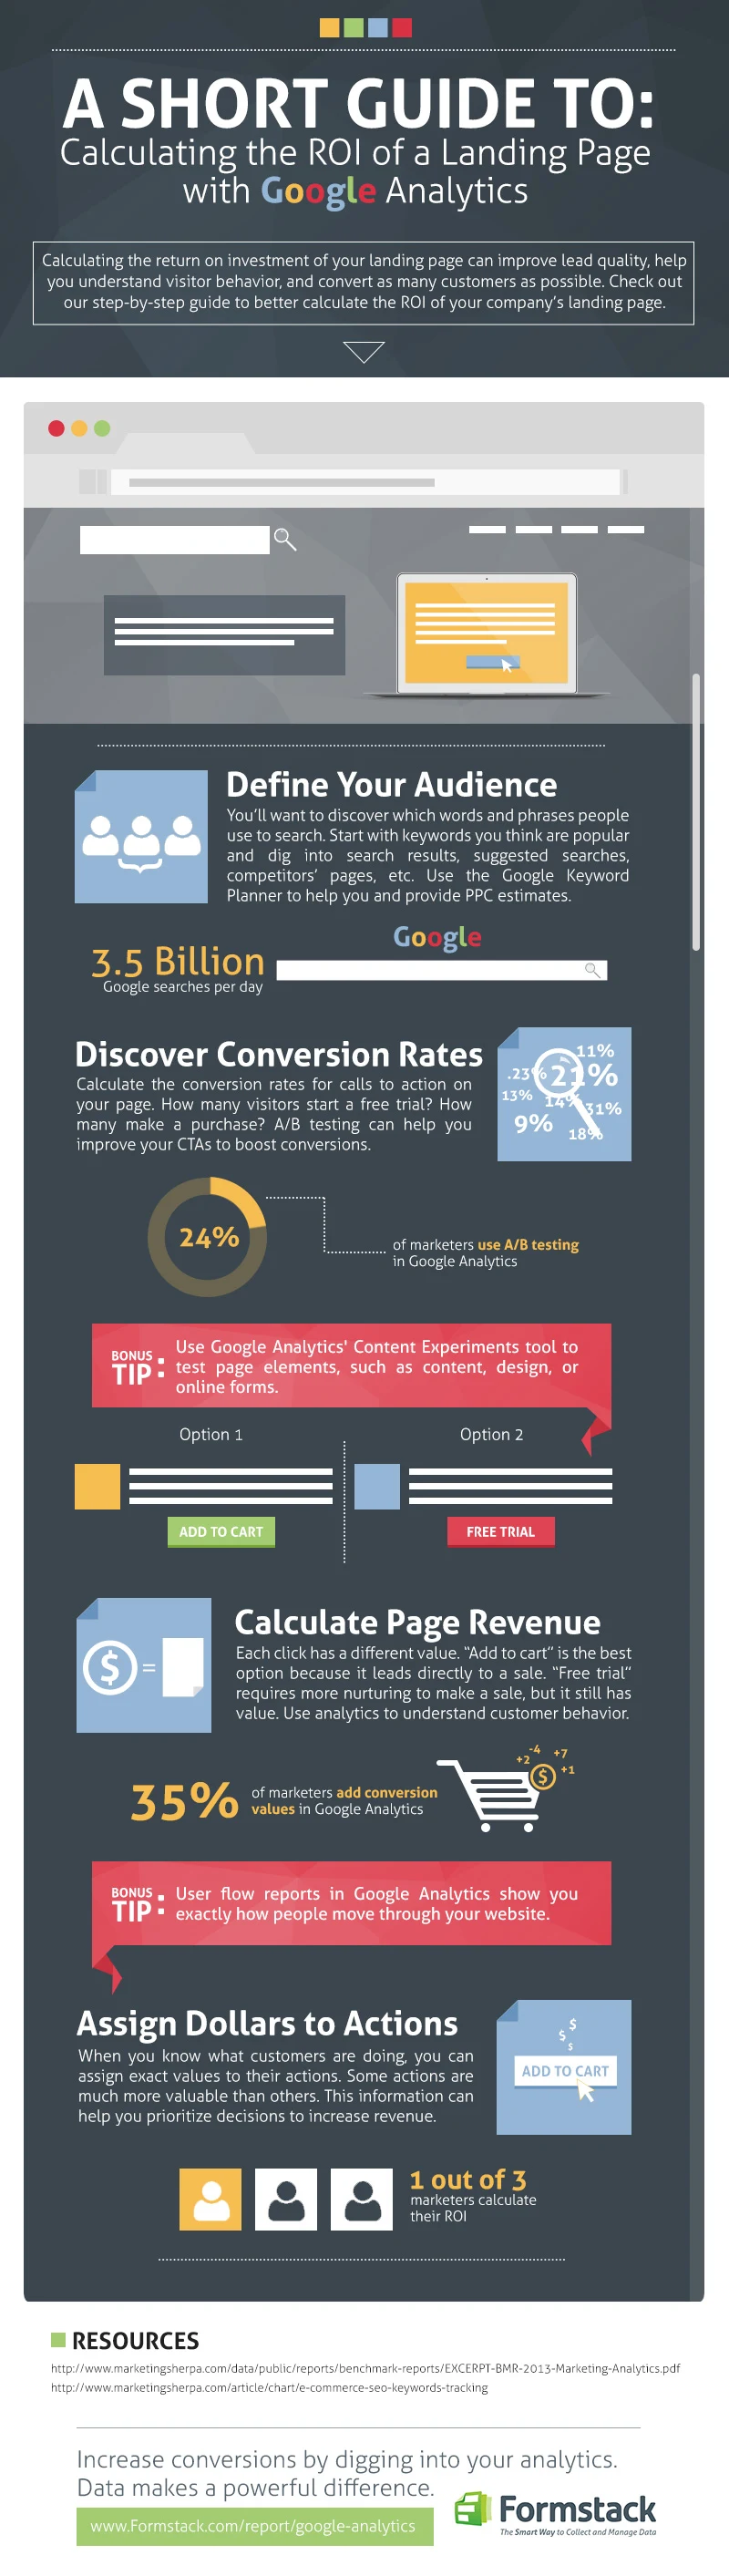 Calculating The ROI Of A Landing Page With Google Analytics - #infographic